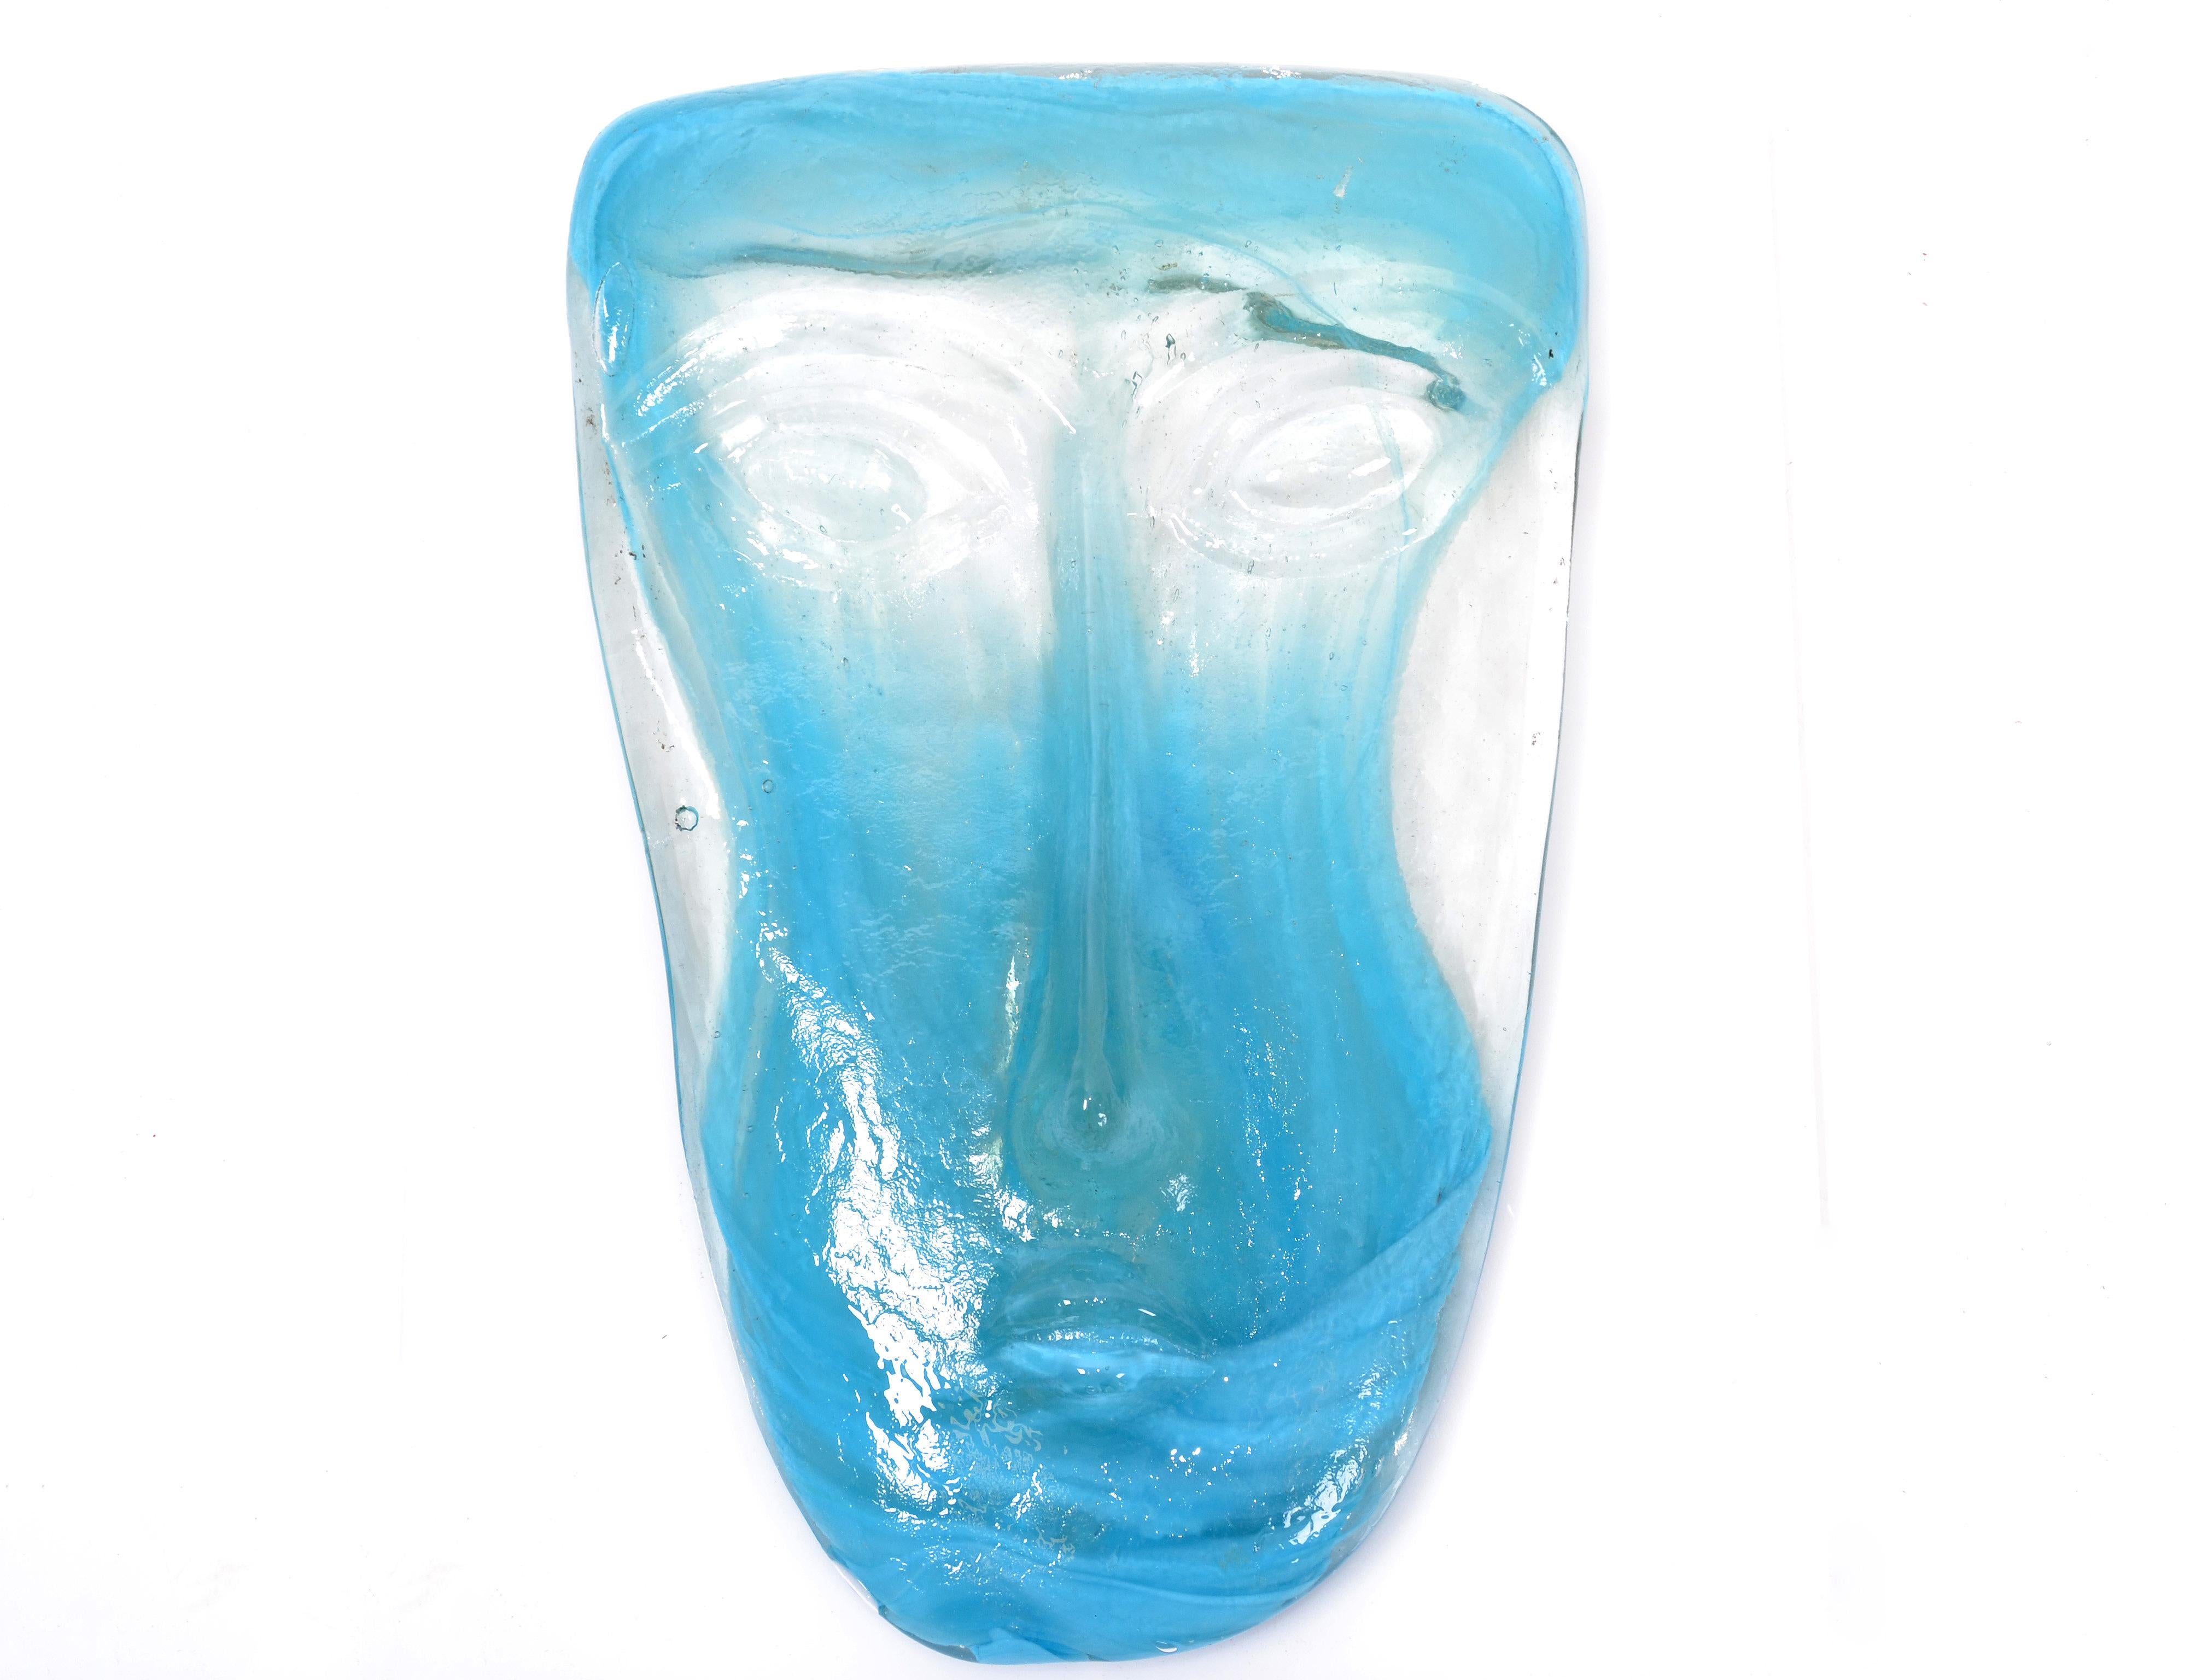 Folk Art blown turquoise and clear Art Glass face masks with wall mounted candleholder made in México.
The glass face mask sits firmly into the frame which is mounted to the wall.
A candle placed behind the mask creates a cozy atmosphere.